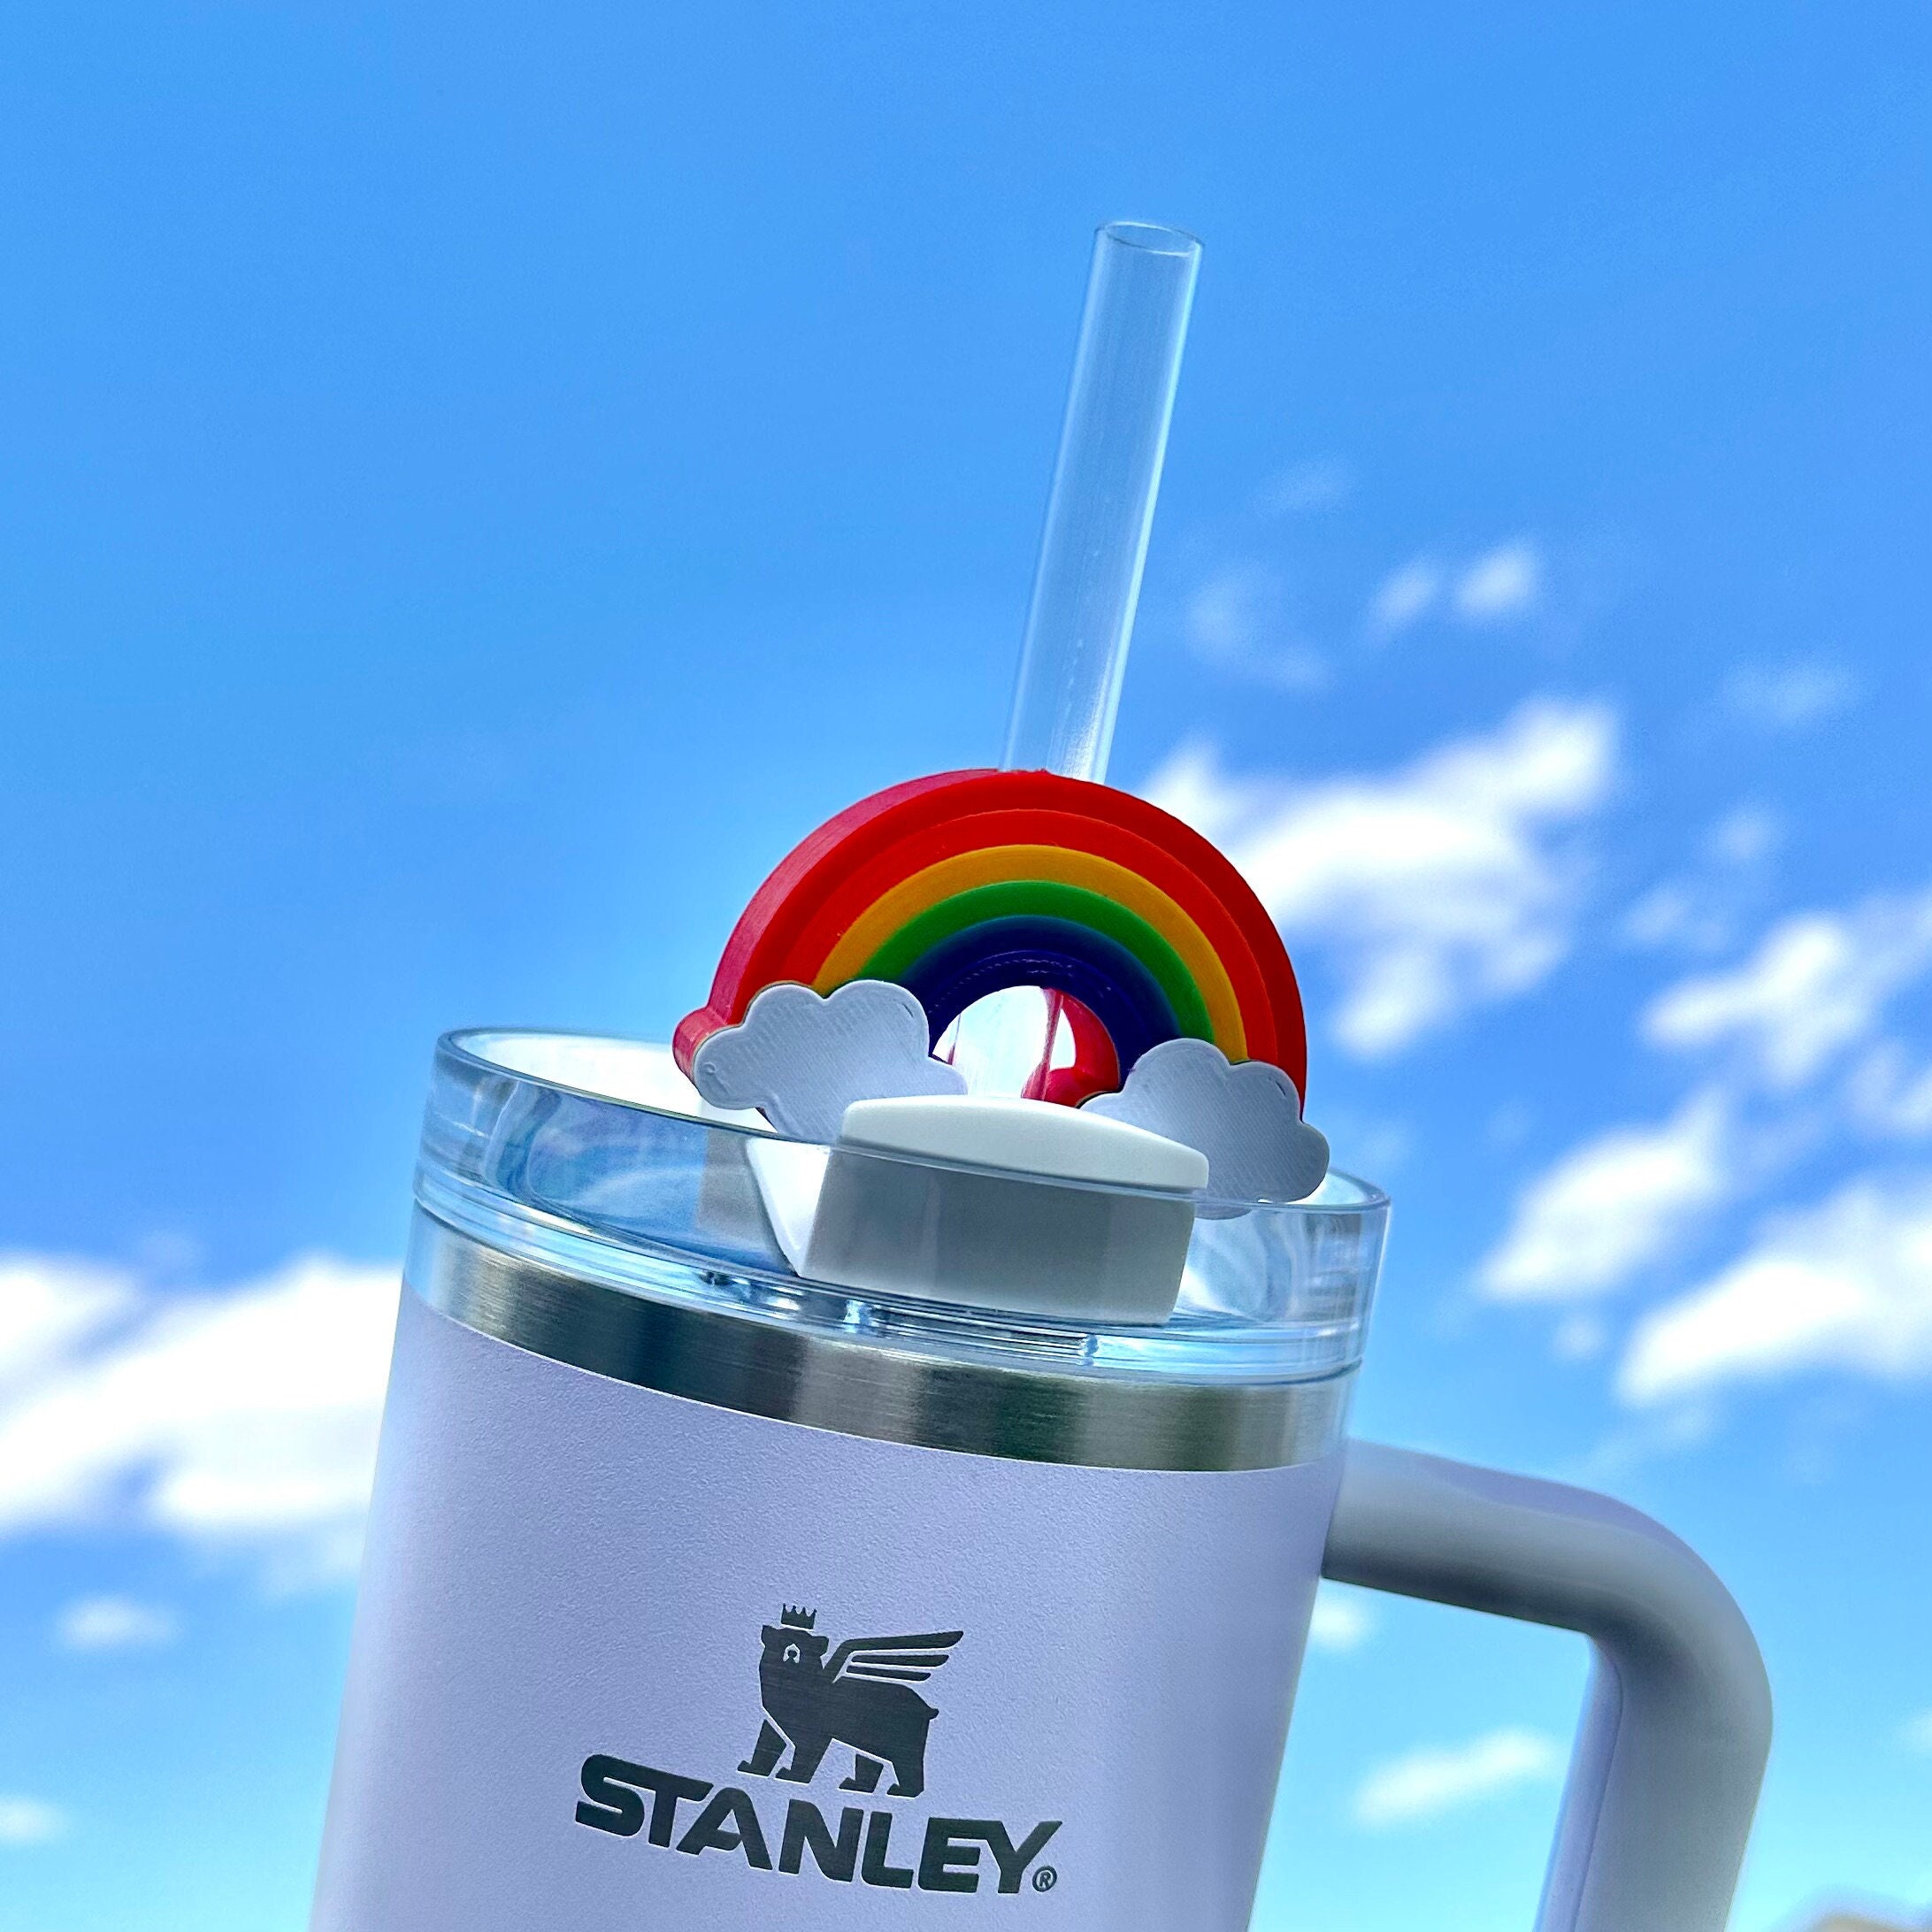 Straw Charm + Stanley obsessed and not mad about it